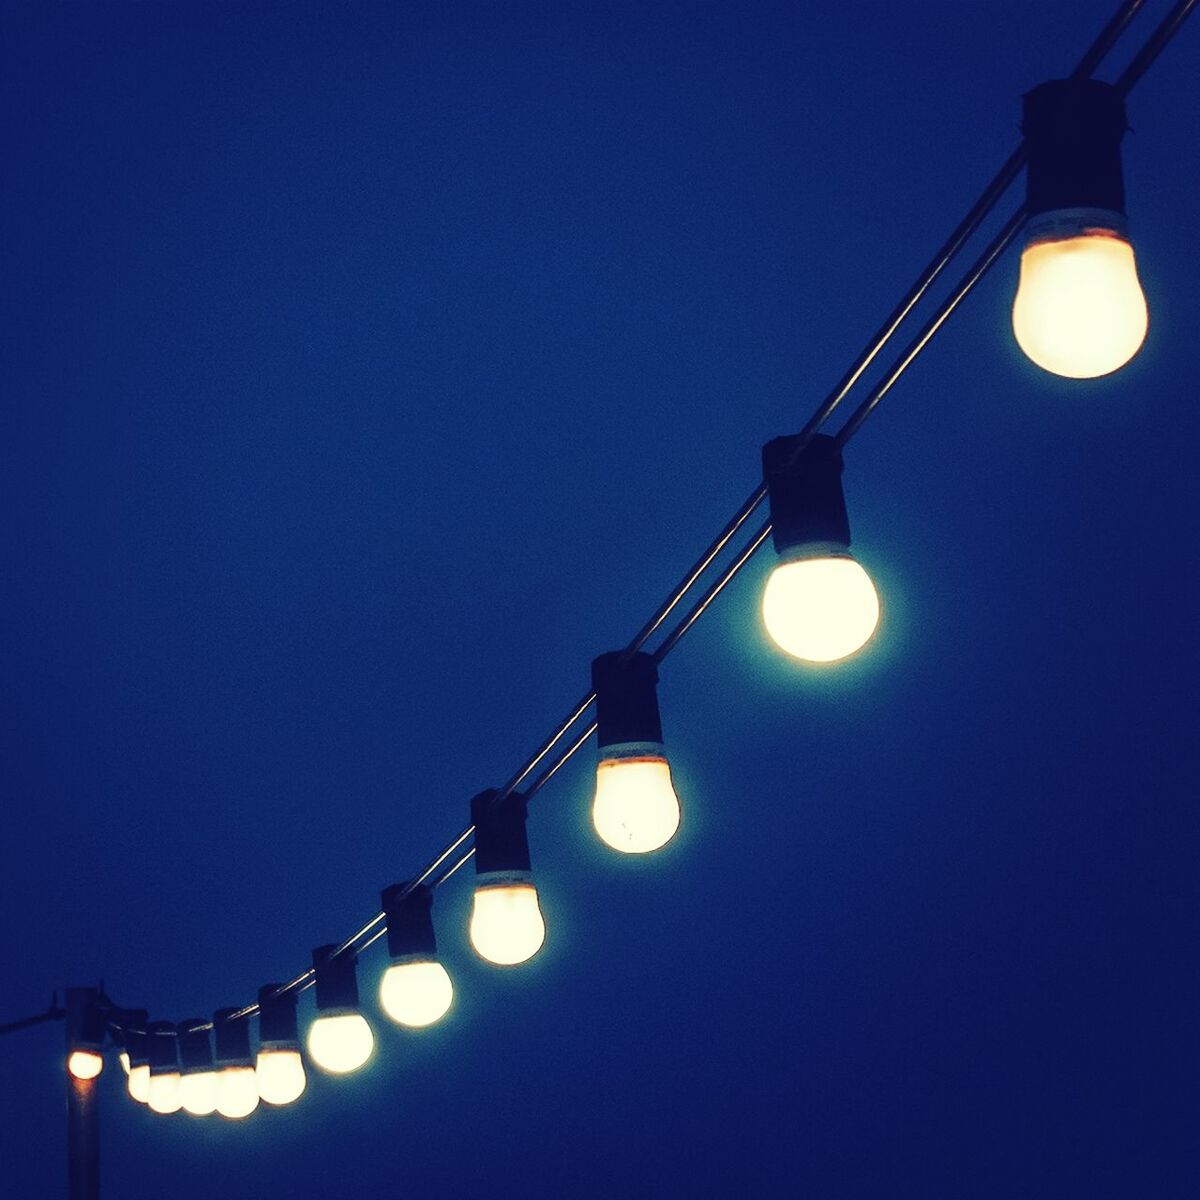 Low angle view of illuminated light bulbs on cable against clear blue sky at dusk